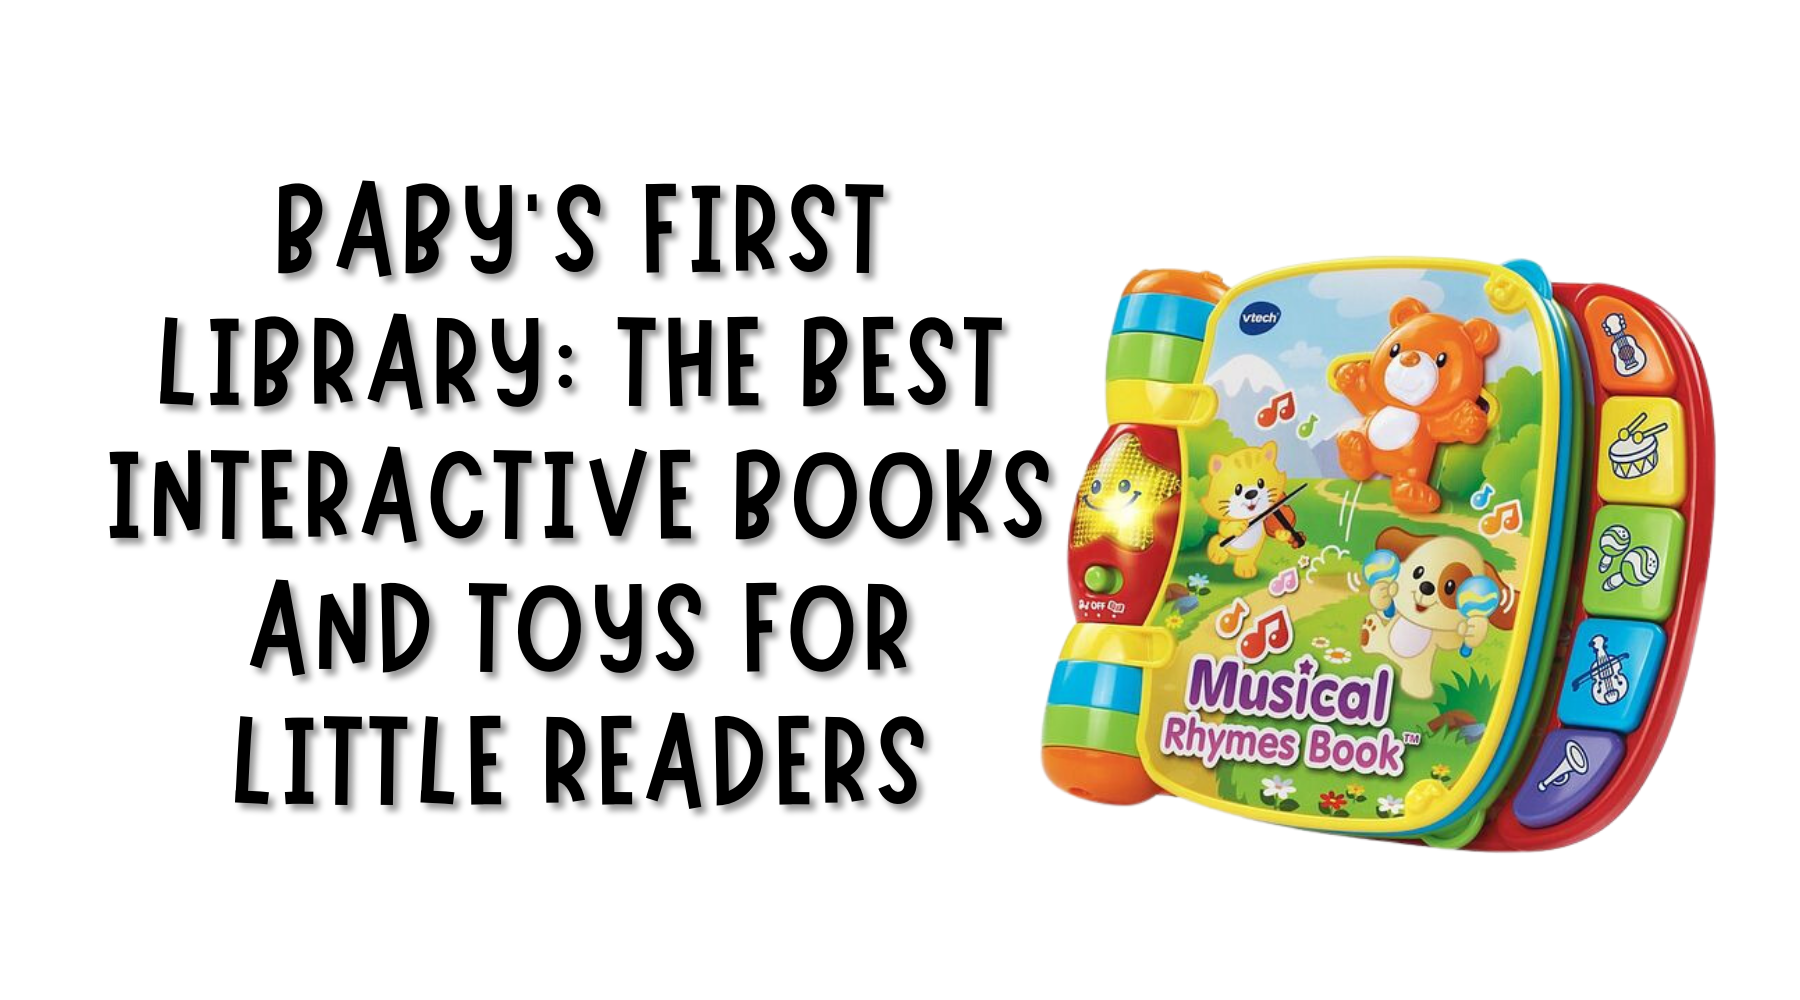  Toys for Little Readers